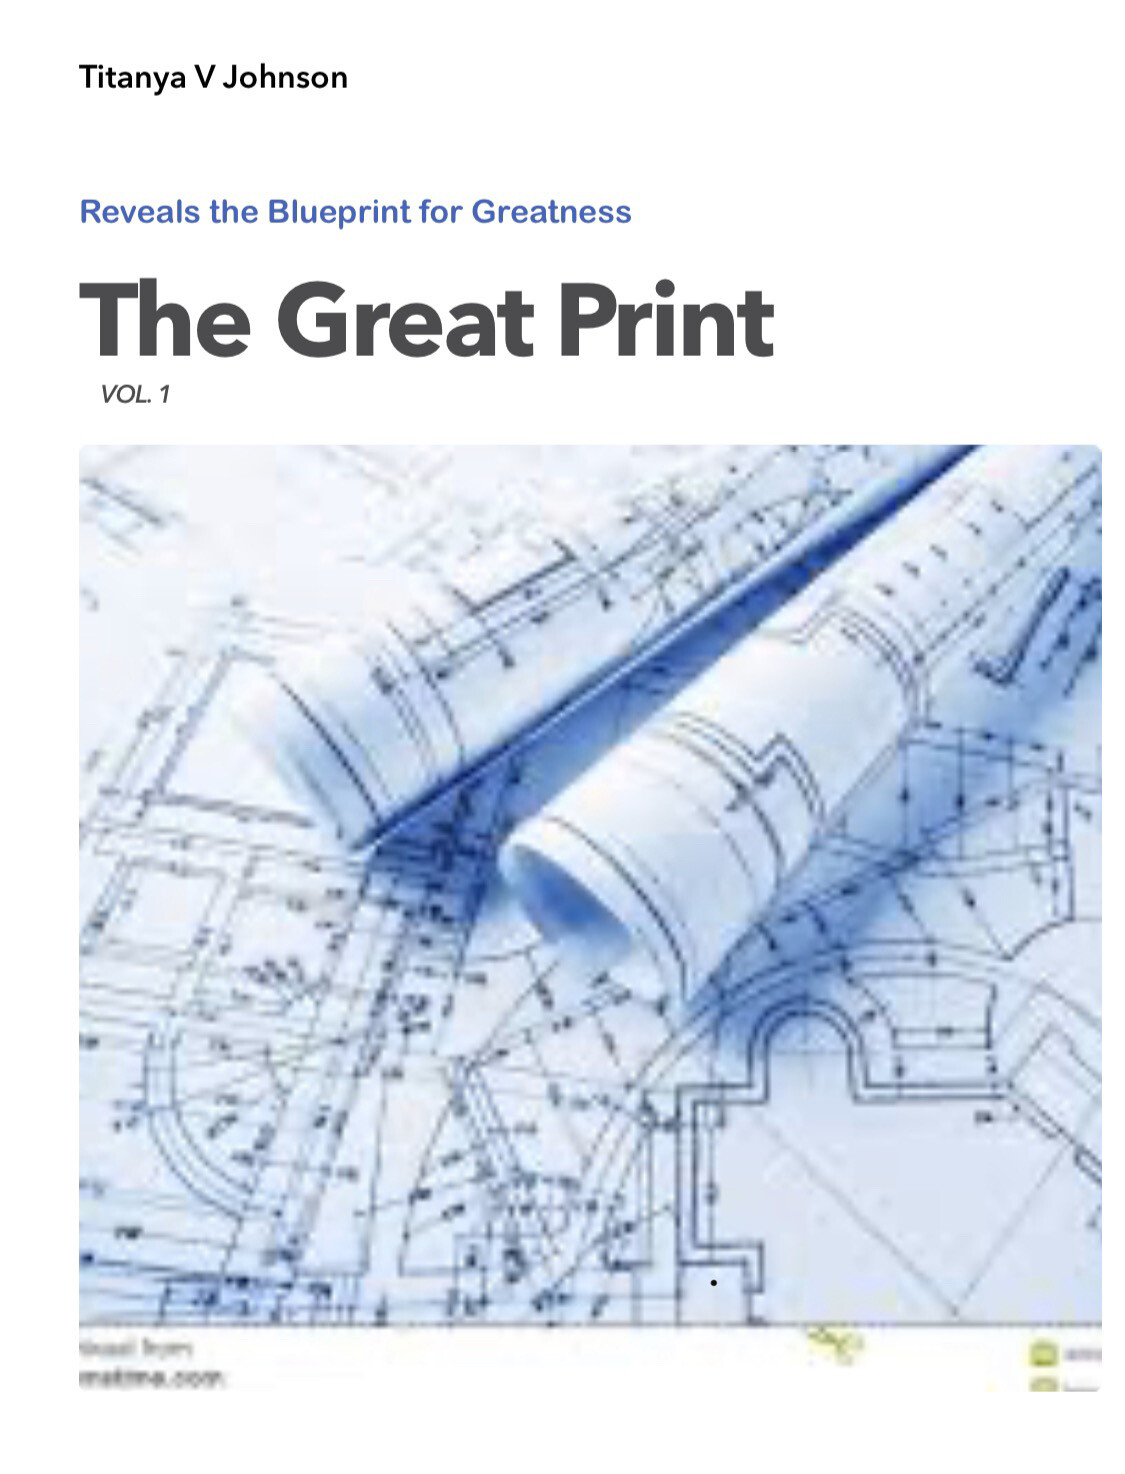 The Great Print (ebook)